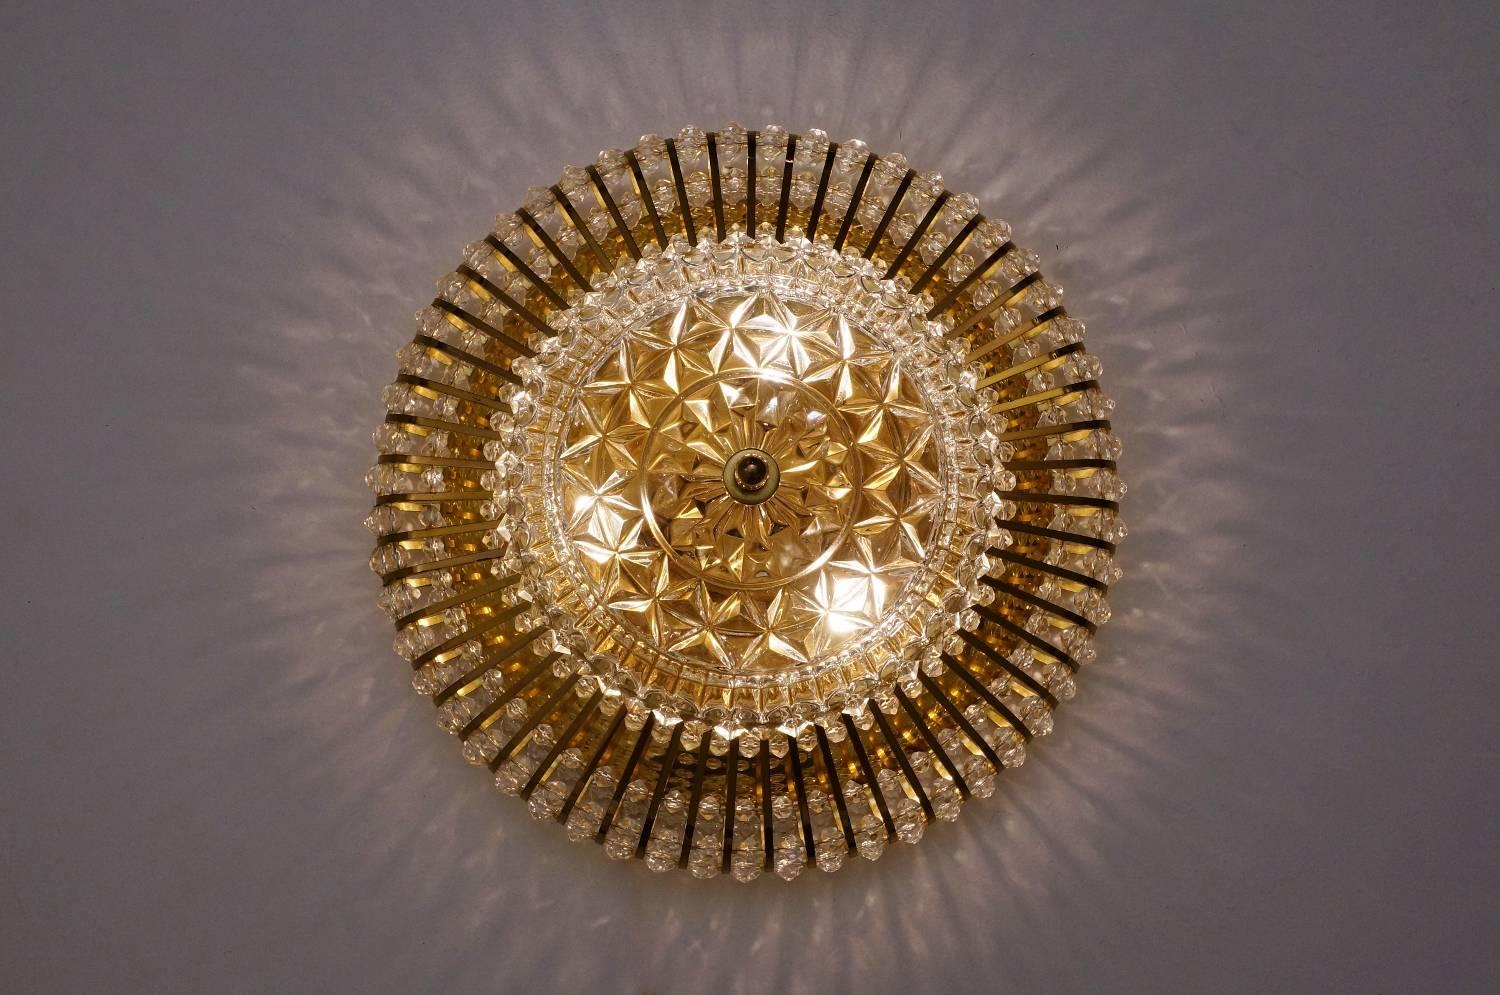 Hillebrand brass, glass and Lucite bead large pair of wall or ceiling lights, circa 1960s, German.

Thoroughly cleaned respecting the vintage patina. Newly rewired, earthed, in full working order and ready to install. Light bulbs included.

This